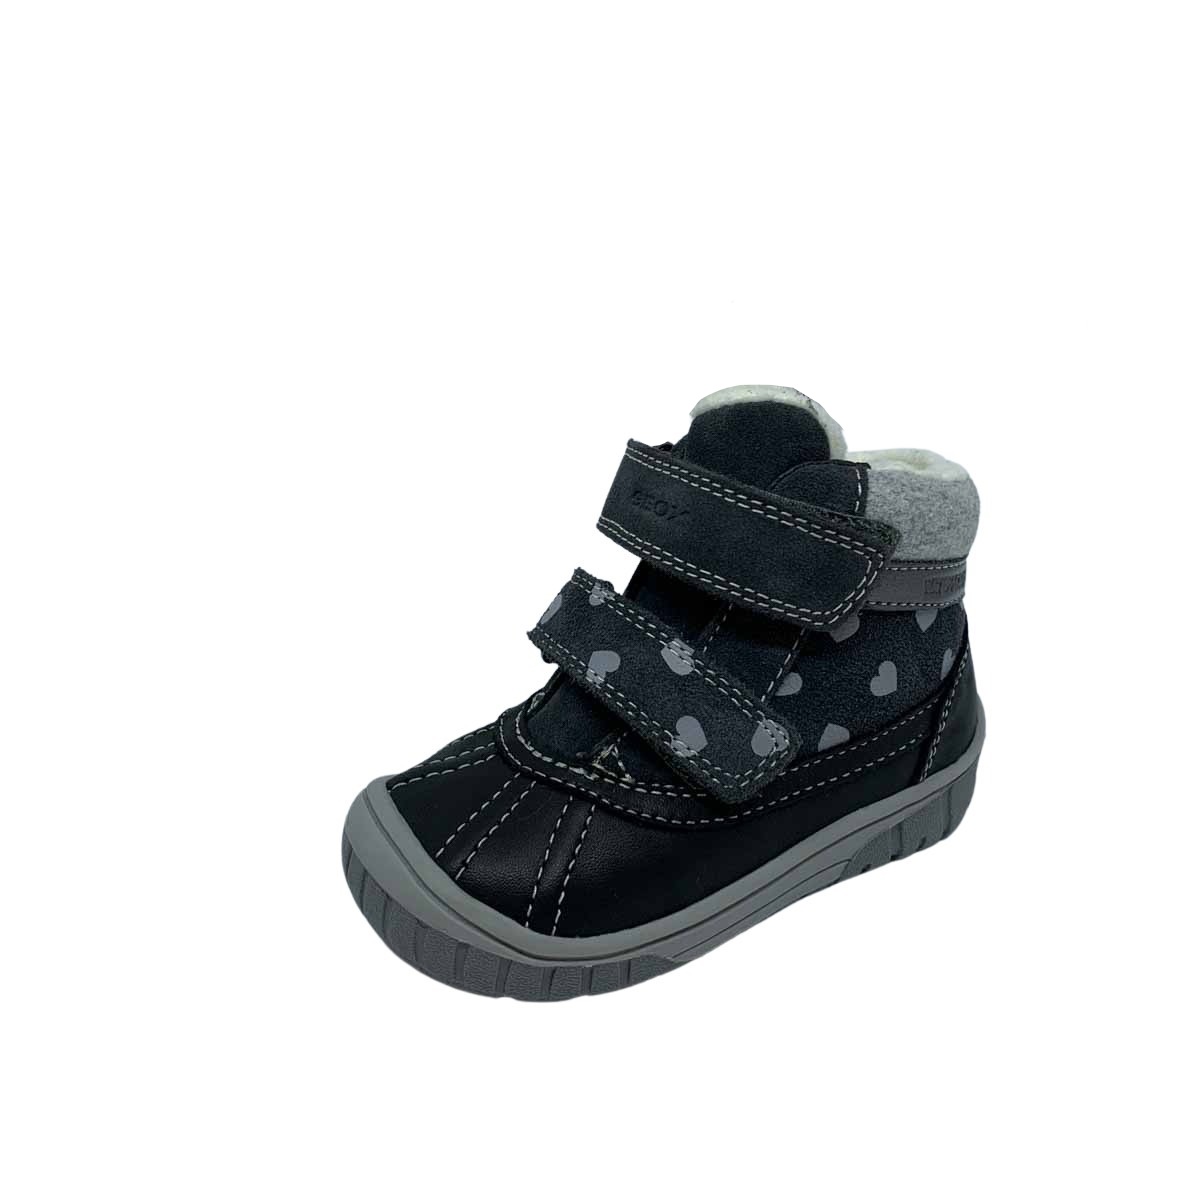 Geox Omar Girl Tex Grey suede Kids Toddler Girls Boots B042LA-C9002 in a Plain  in Size 25